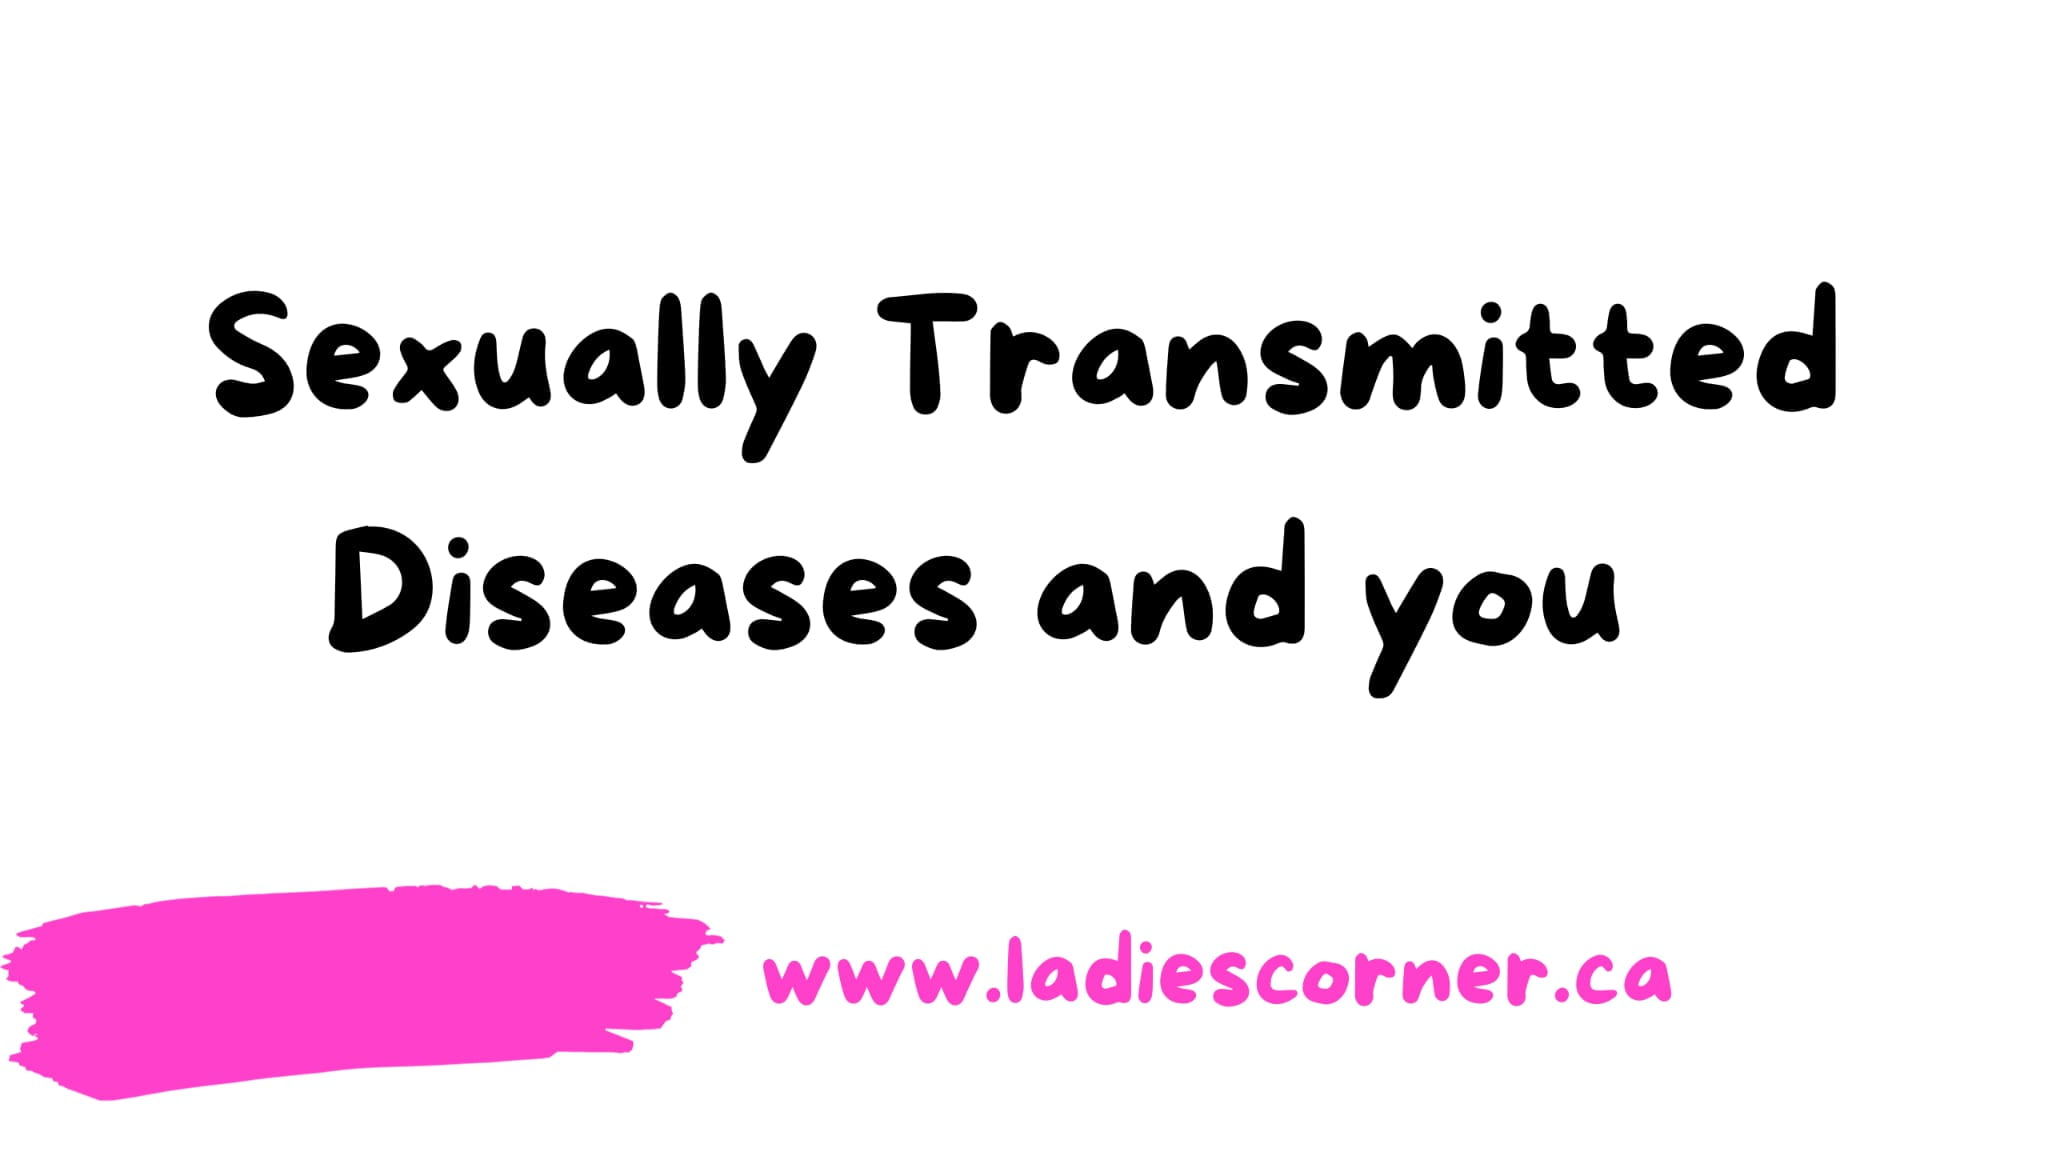 Sexually transmitted diseases and you